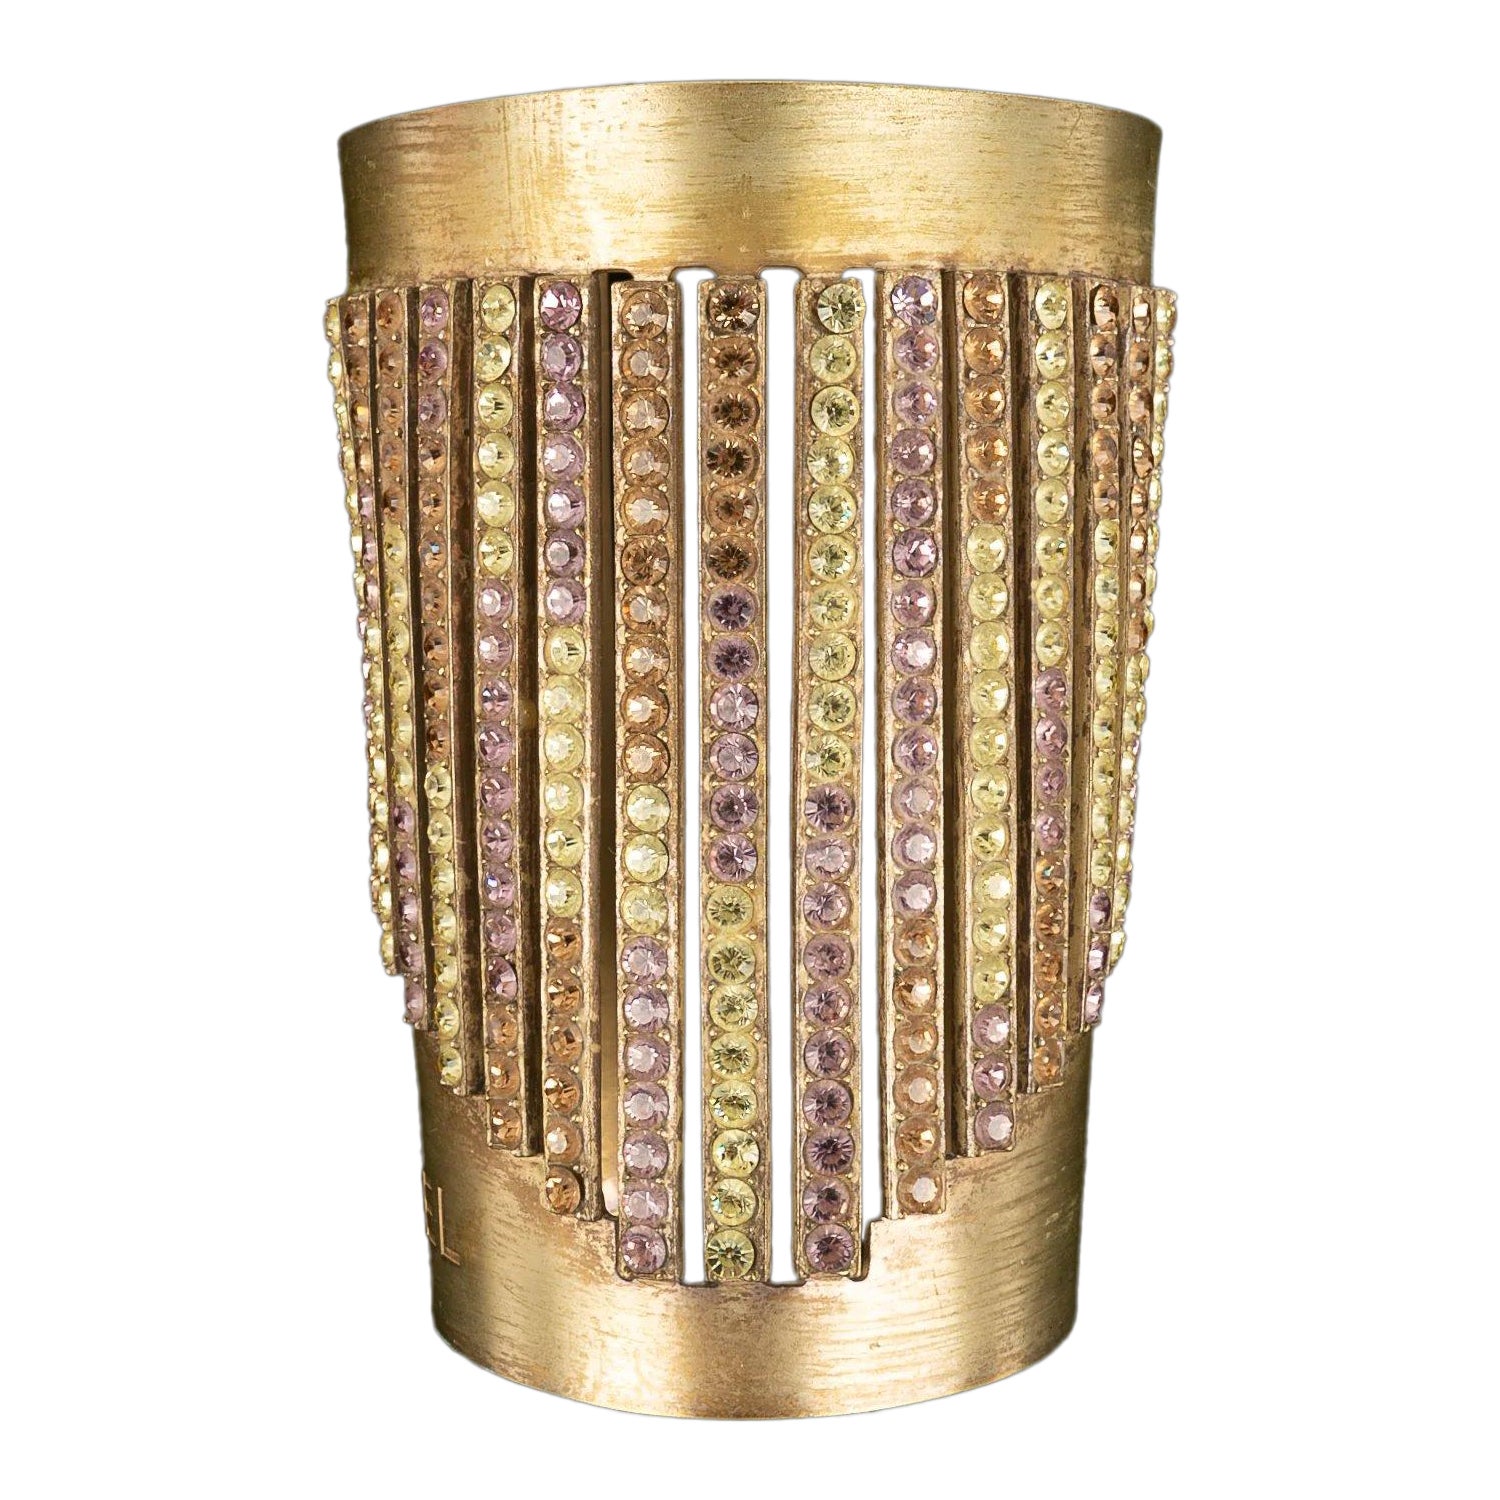 Chanel Cuff Bracelet in Golden Metal Sleeve Paved with Multicolored Rhinestones For Sale